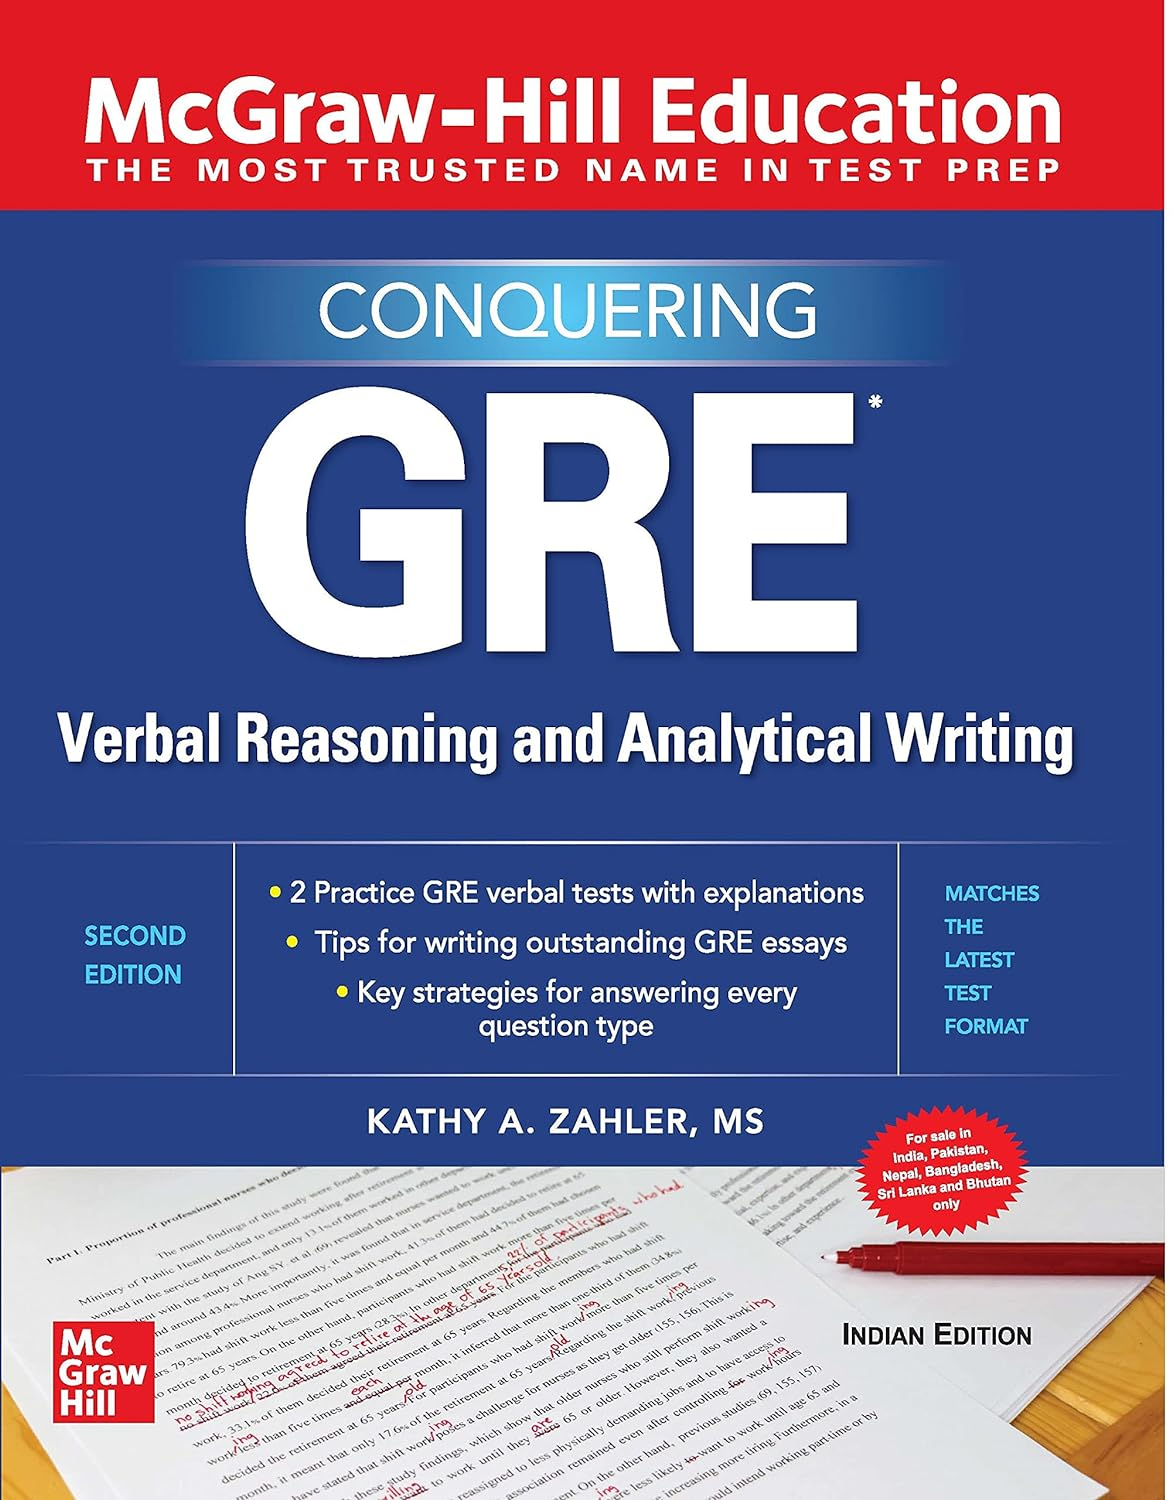 McGraw Hill Education’s Conquering GRE Verbal Reasoning